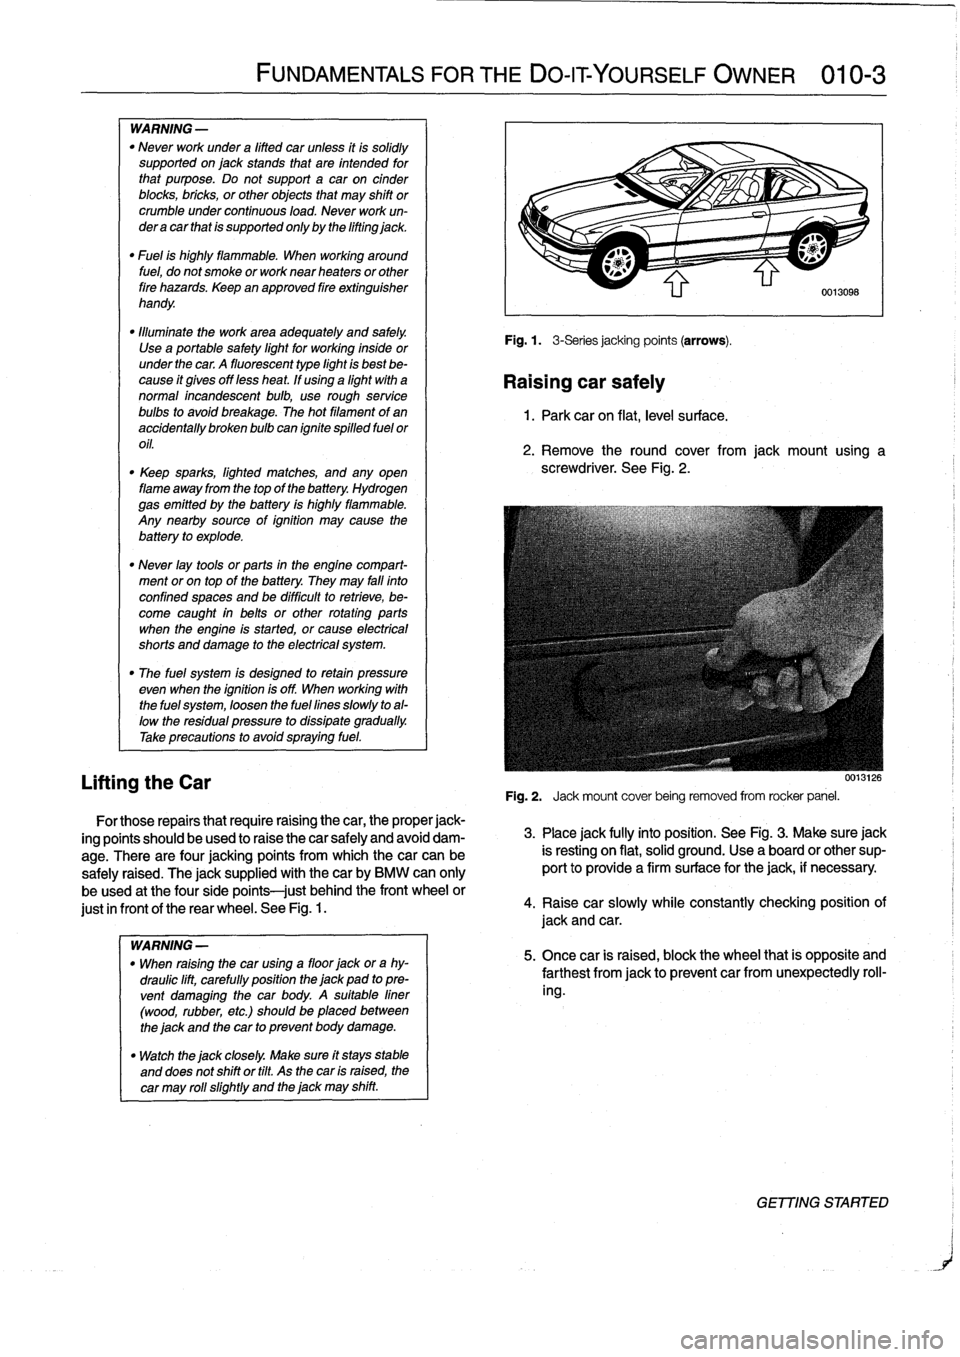 BMW 328i 1997 E36 Workshop Manual 
WARNING
-

"
Never
work
under
a
lifted
car
unless
it
is
solidly
supported
on
jack
stands
that
are
intended
for
that
purpose
.
Do
not
support
a
car
on
cinder
blocks,
bricks,
or
other
objects
that
may
